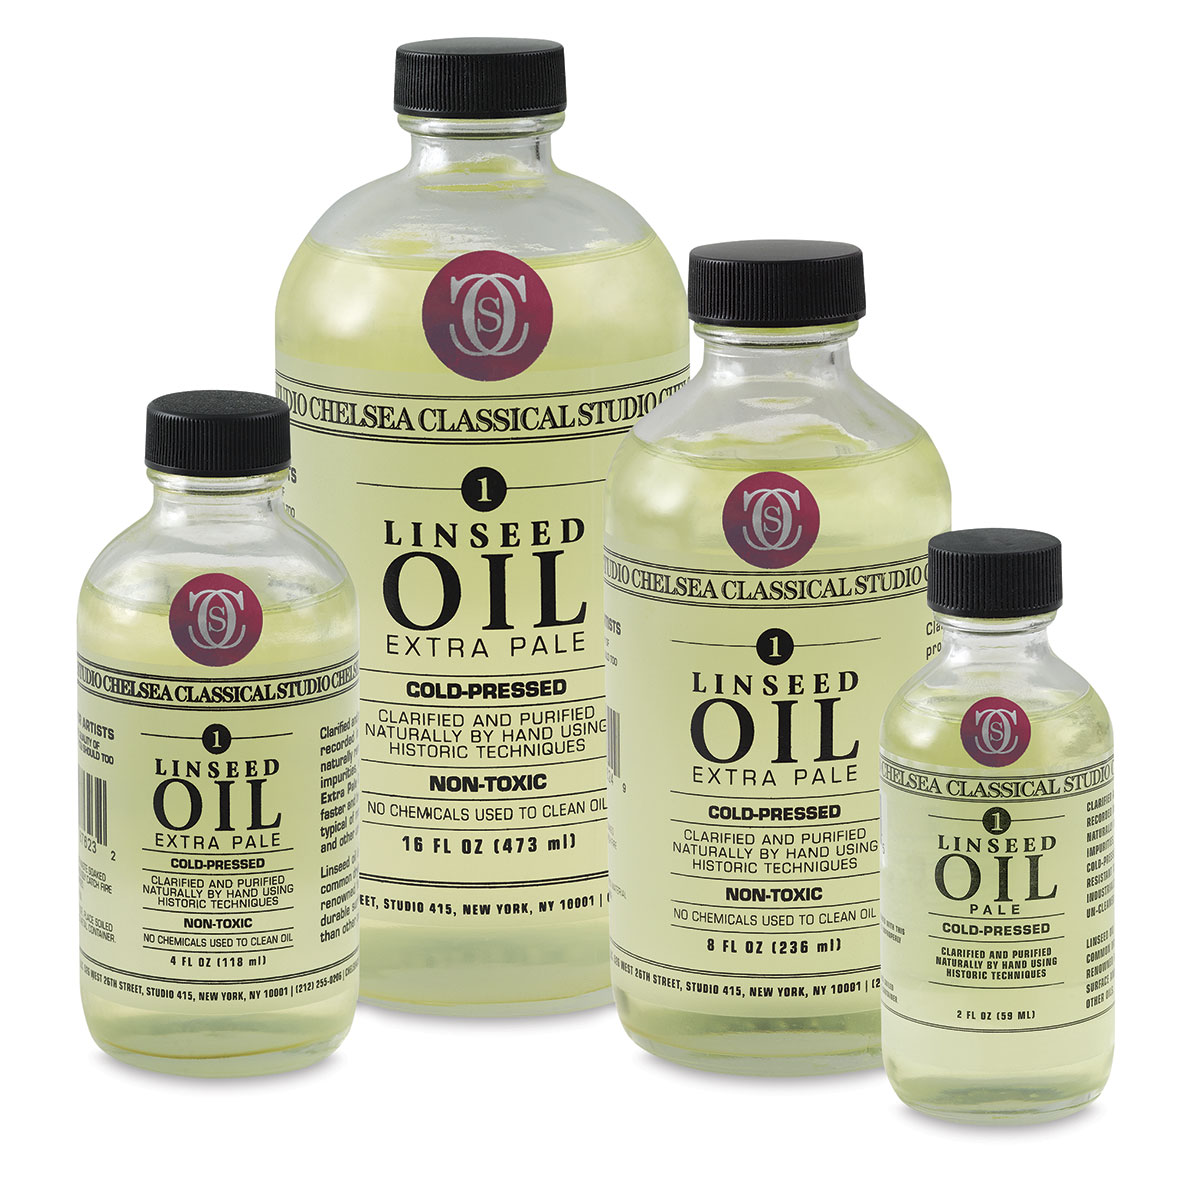 Cold-Pressed Linseed Oil 8 fl oz